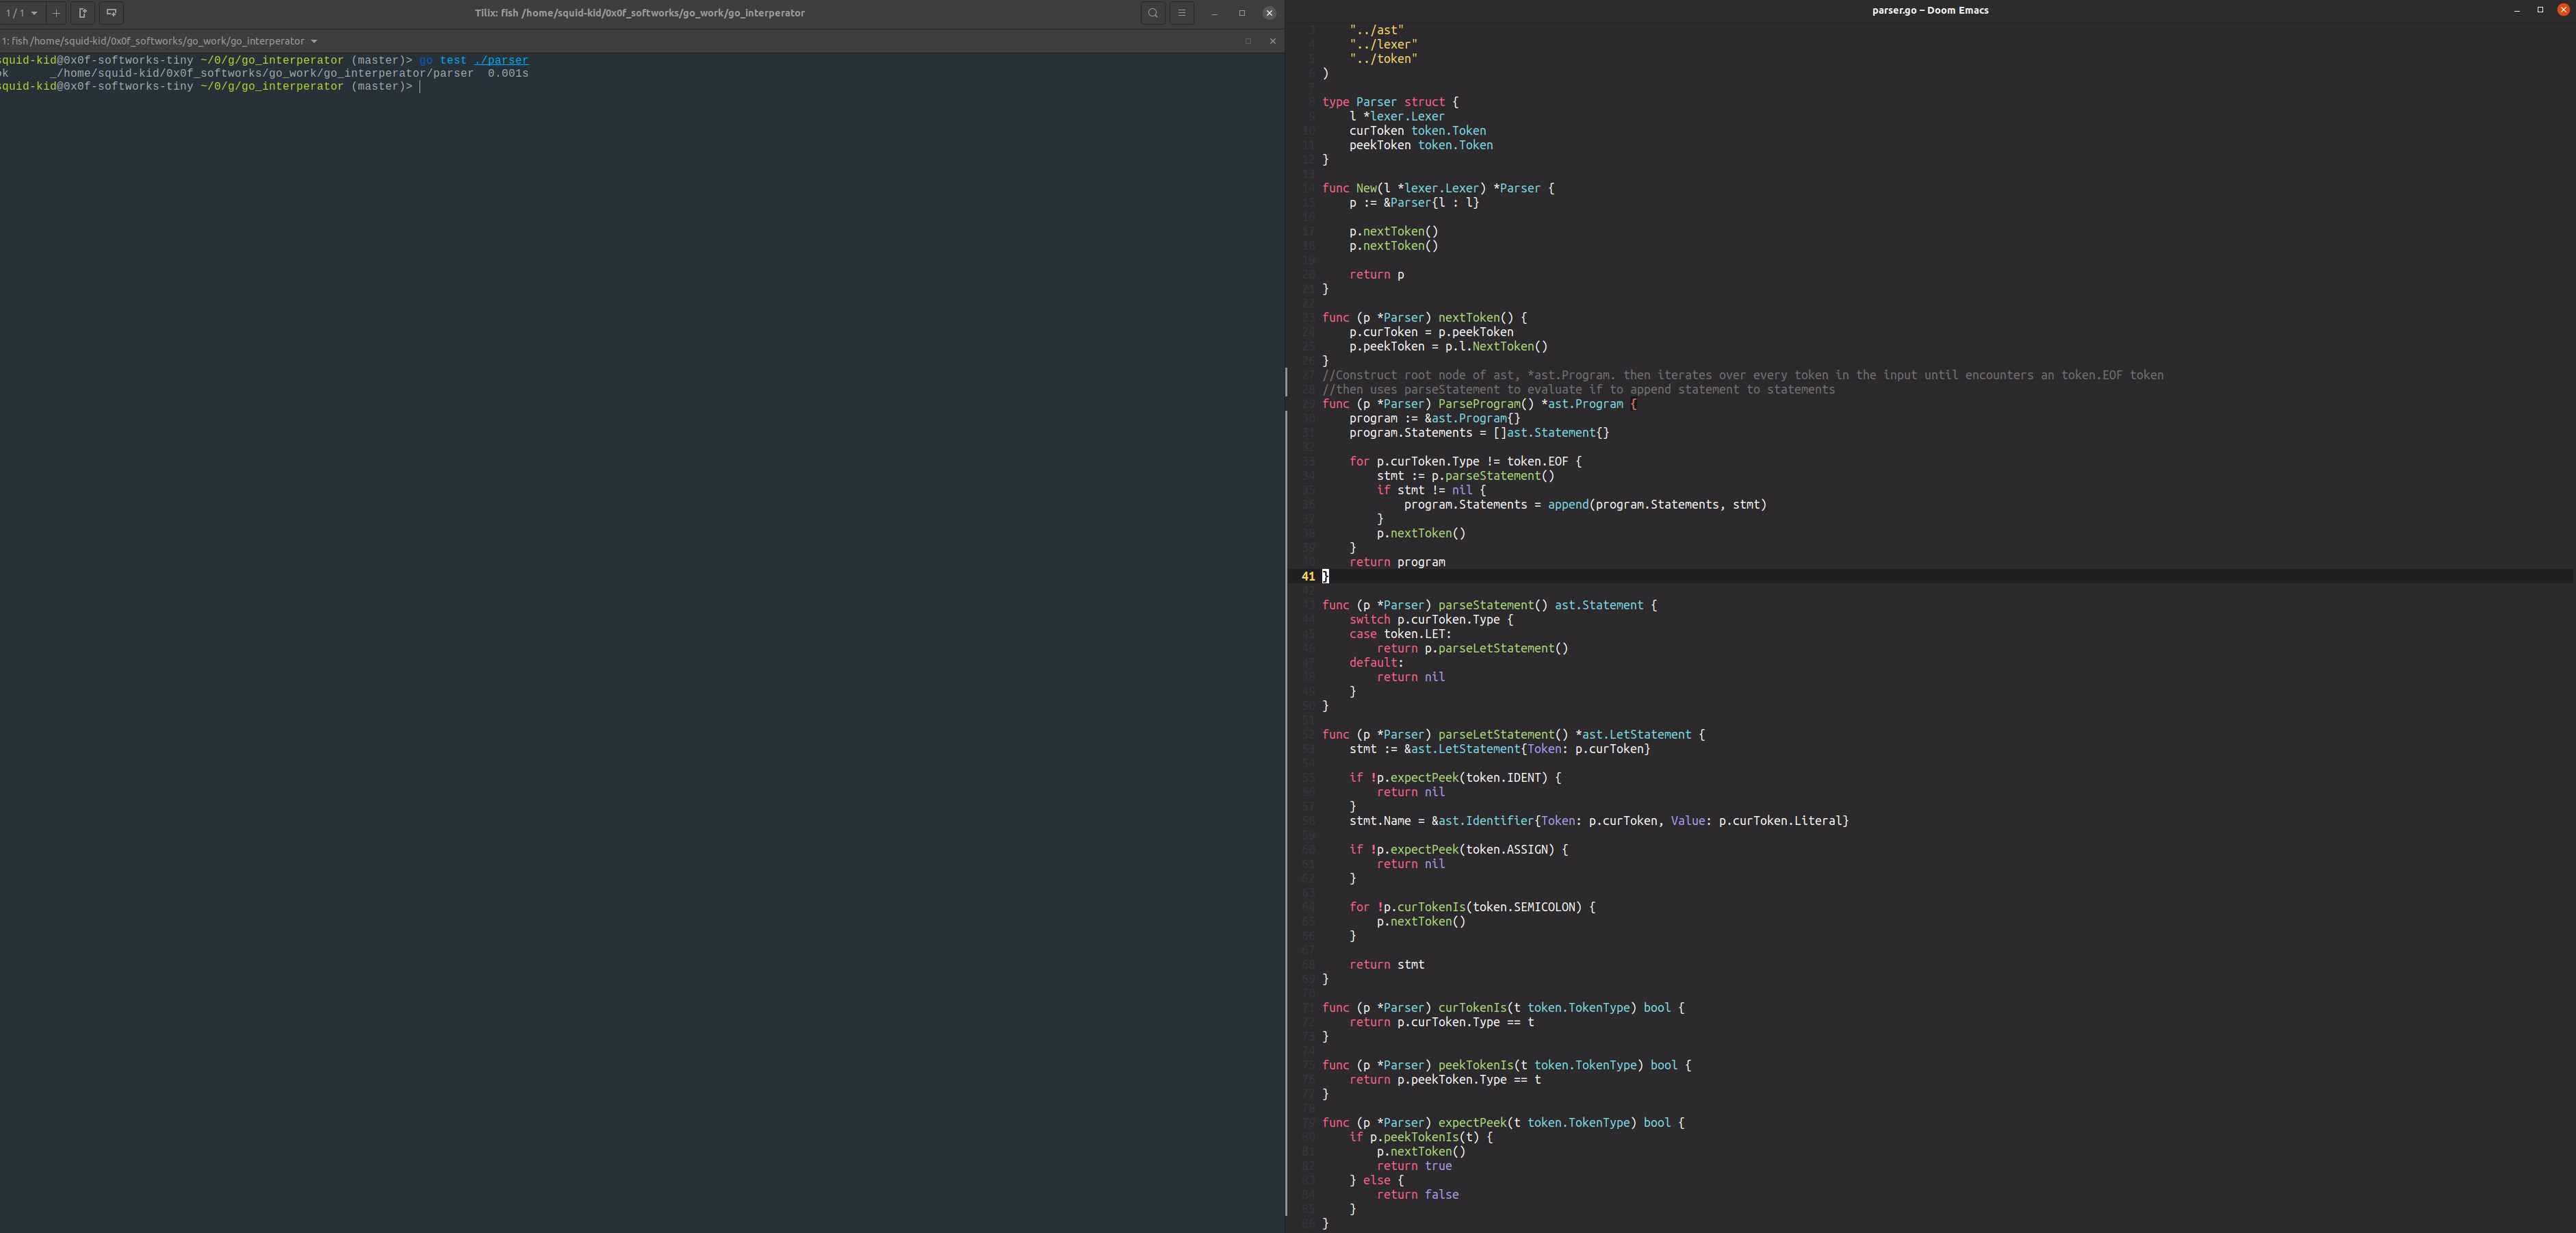 do y'all like my emacs theme?